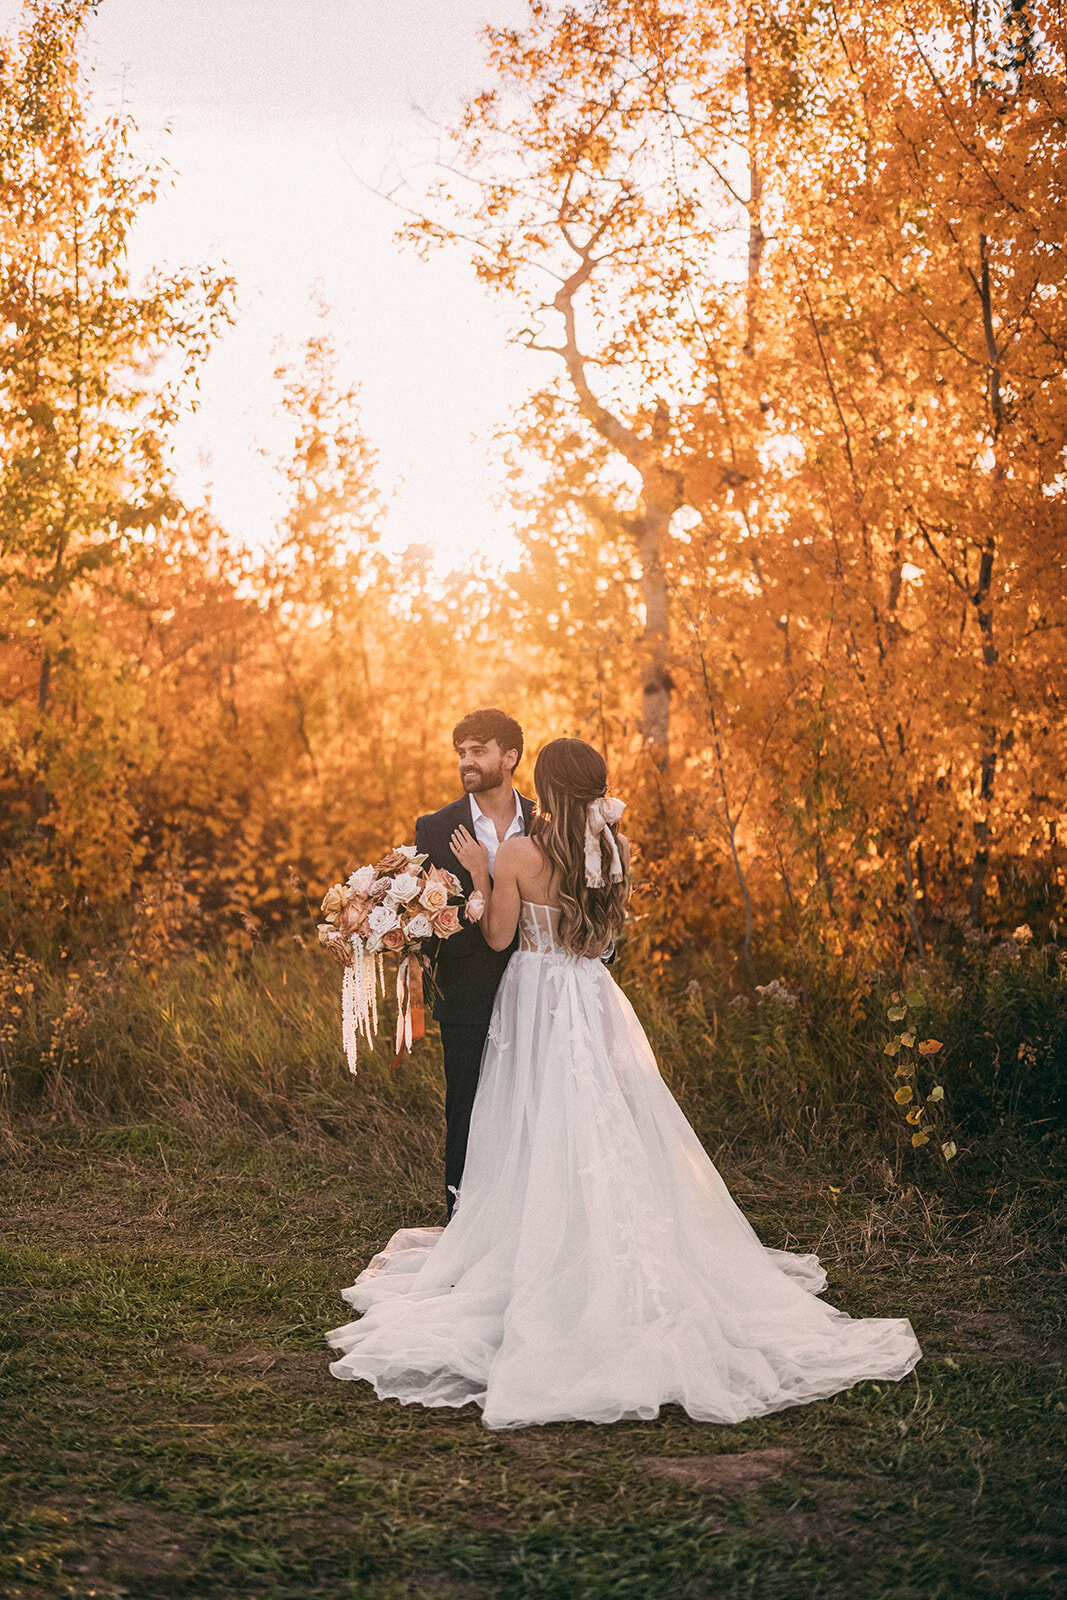 Fall inspired bridals at River's Edge, a picturesque country wedding venue in Devon, Alberta, featured on the Brontë Bride Vendor Guide.